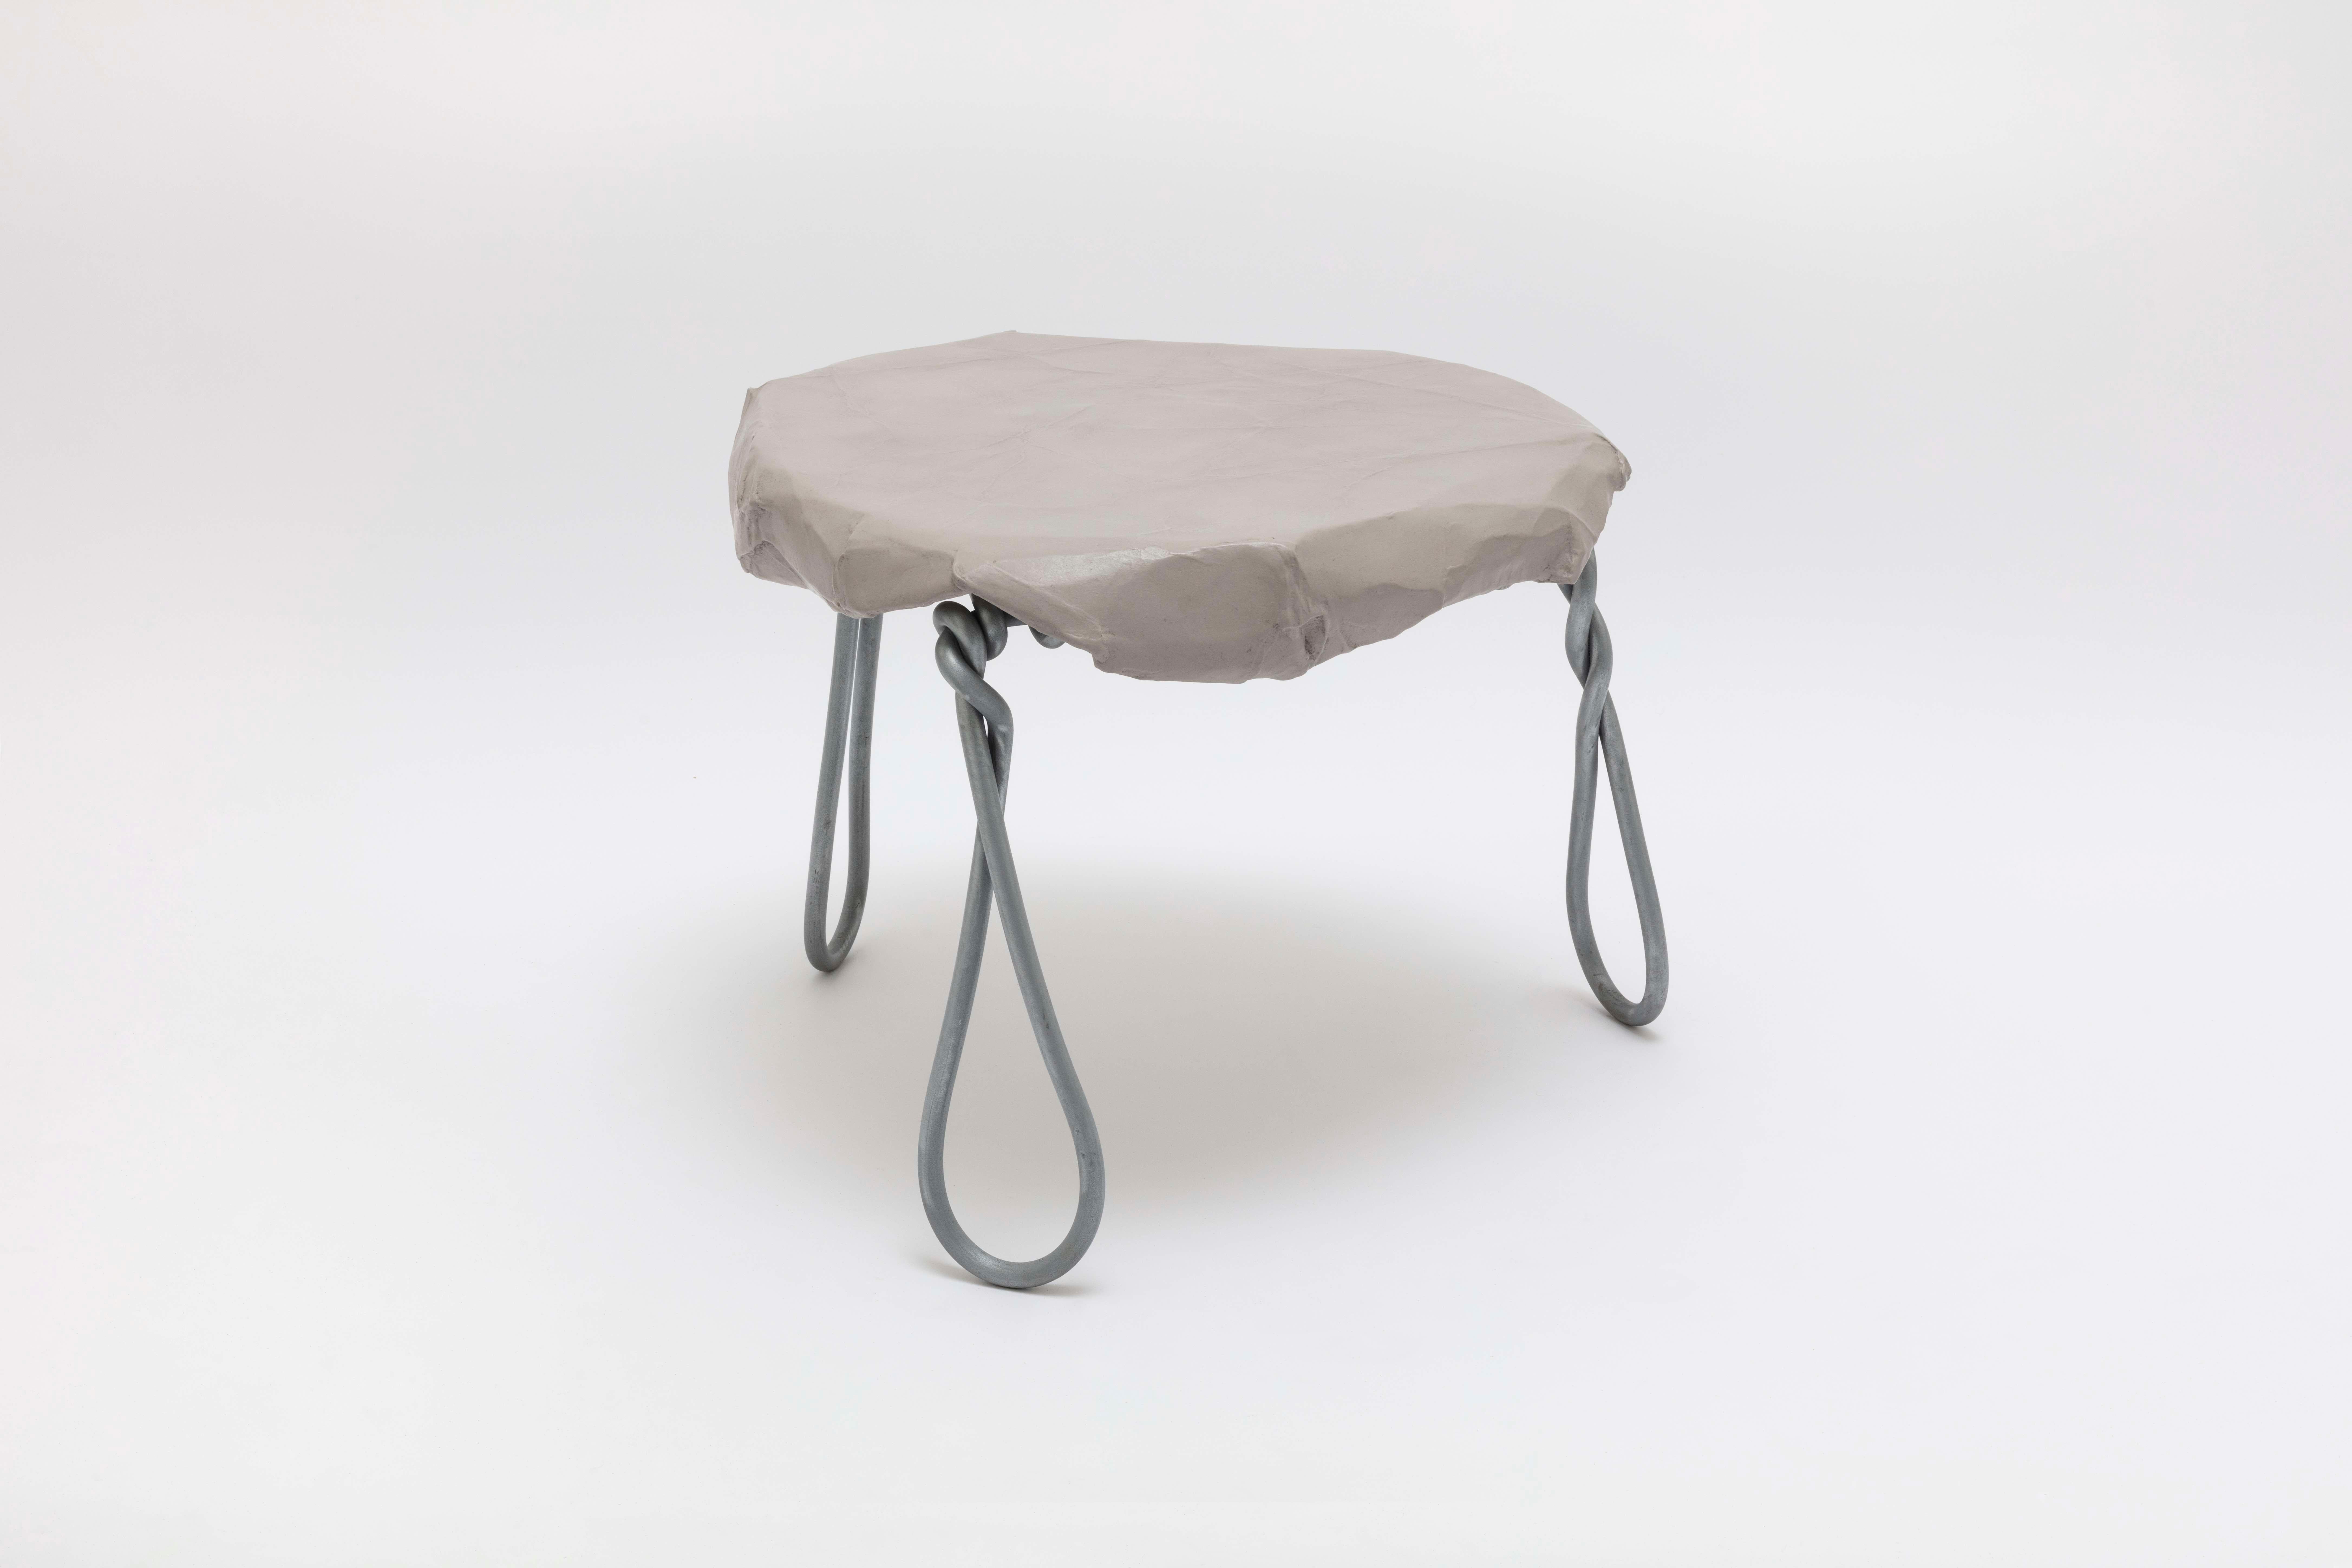 Faye Toogood [British, b. 1977]
Maquette 264 / Wire and card side table, 2020
Zinc-coated steel, cast aluminum, acrylic paint
Measures 19.5 x 23.25 x 24.5 inches
50 x 59 x 62 cm
Signed and editioned

Faye Toogood was born in the UK in 1977 and